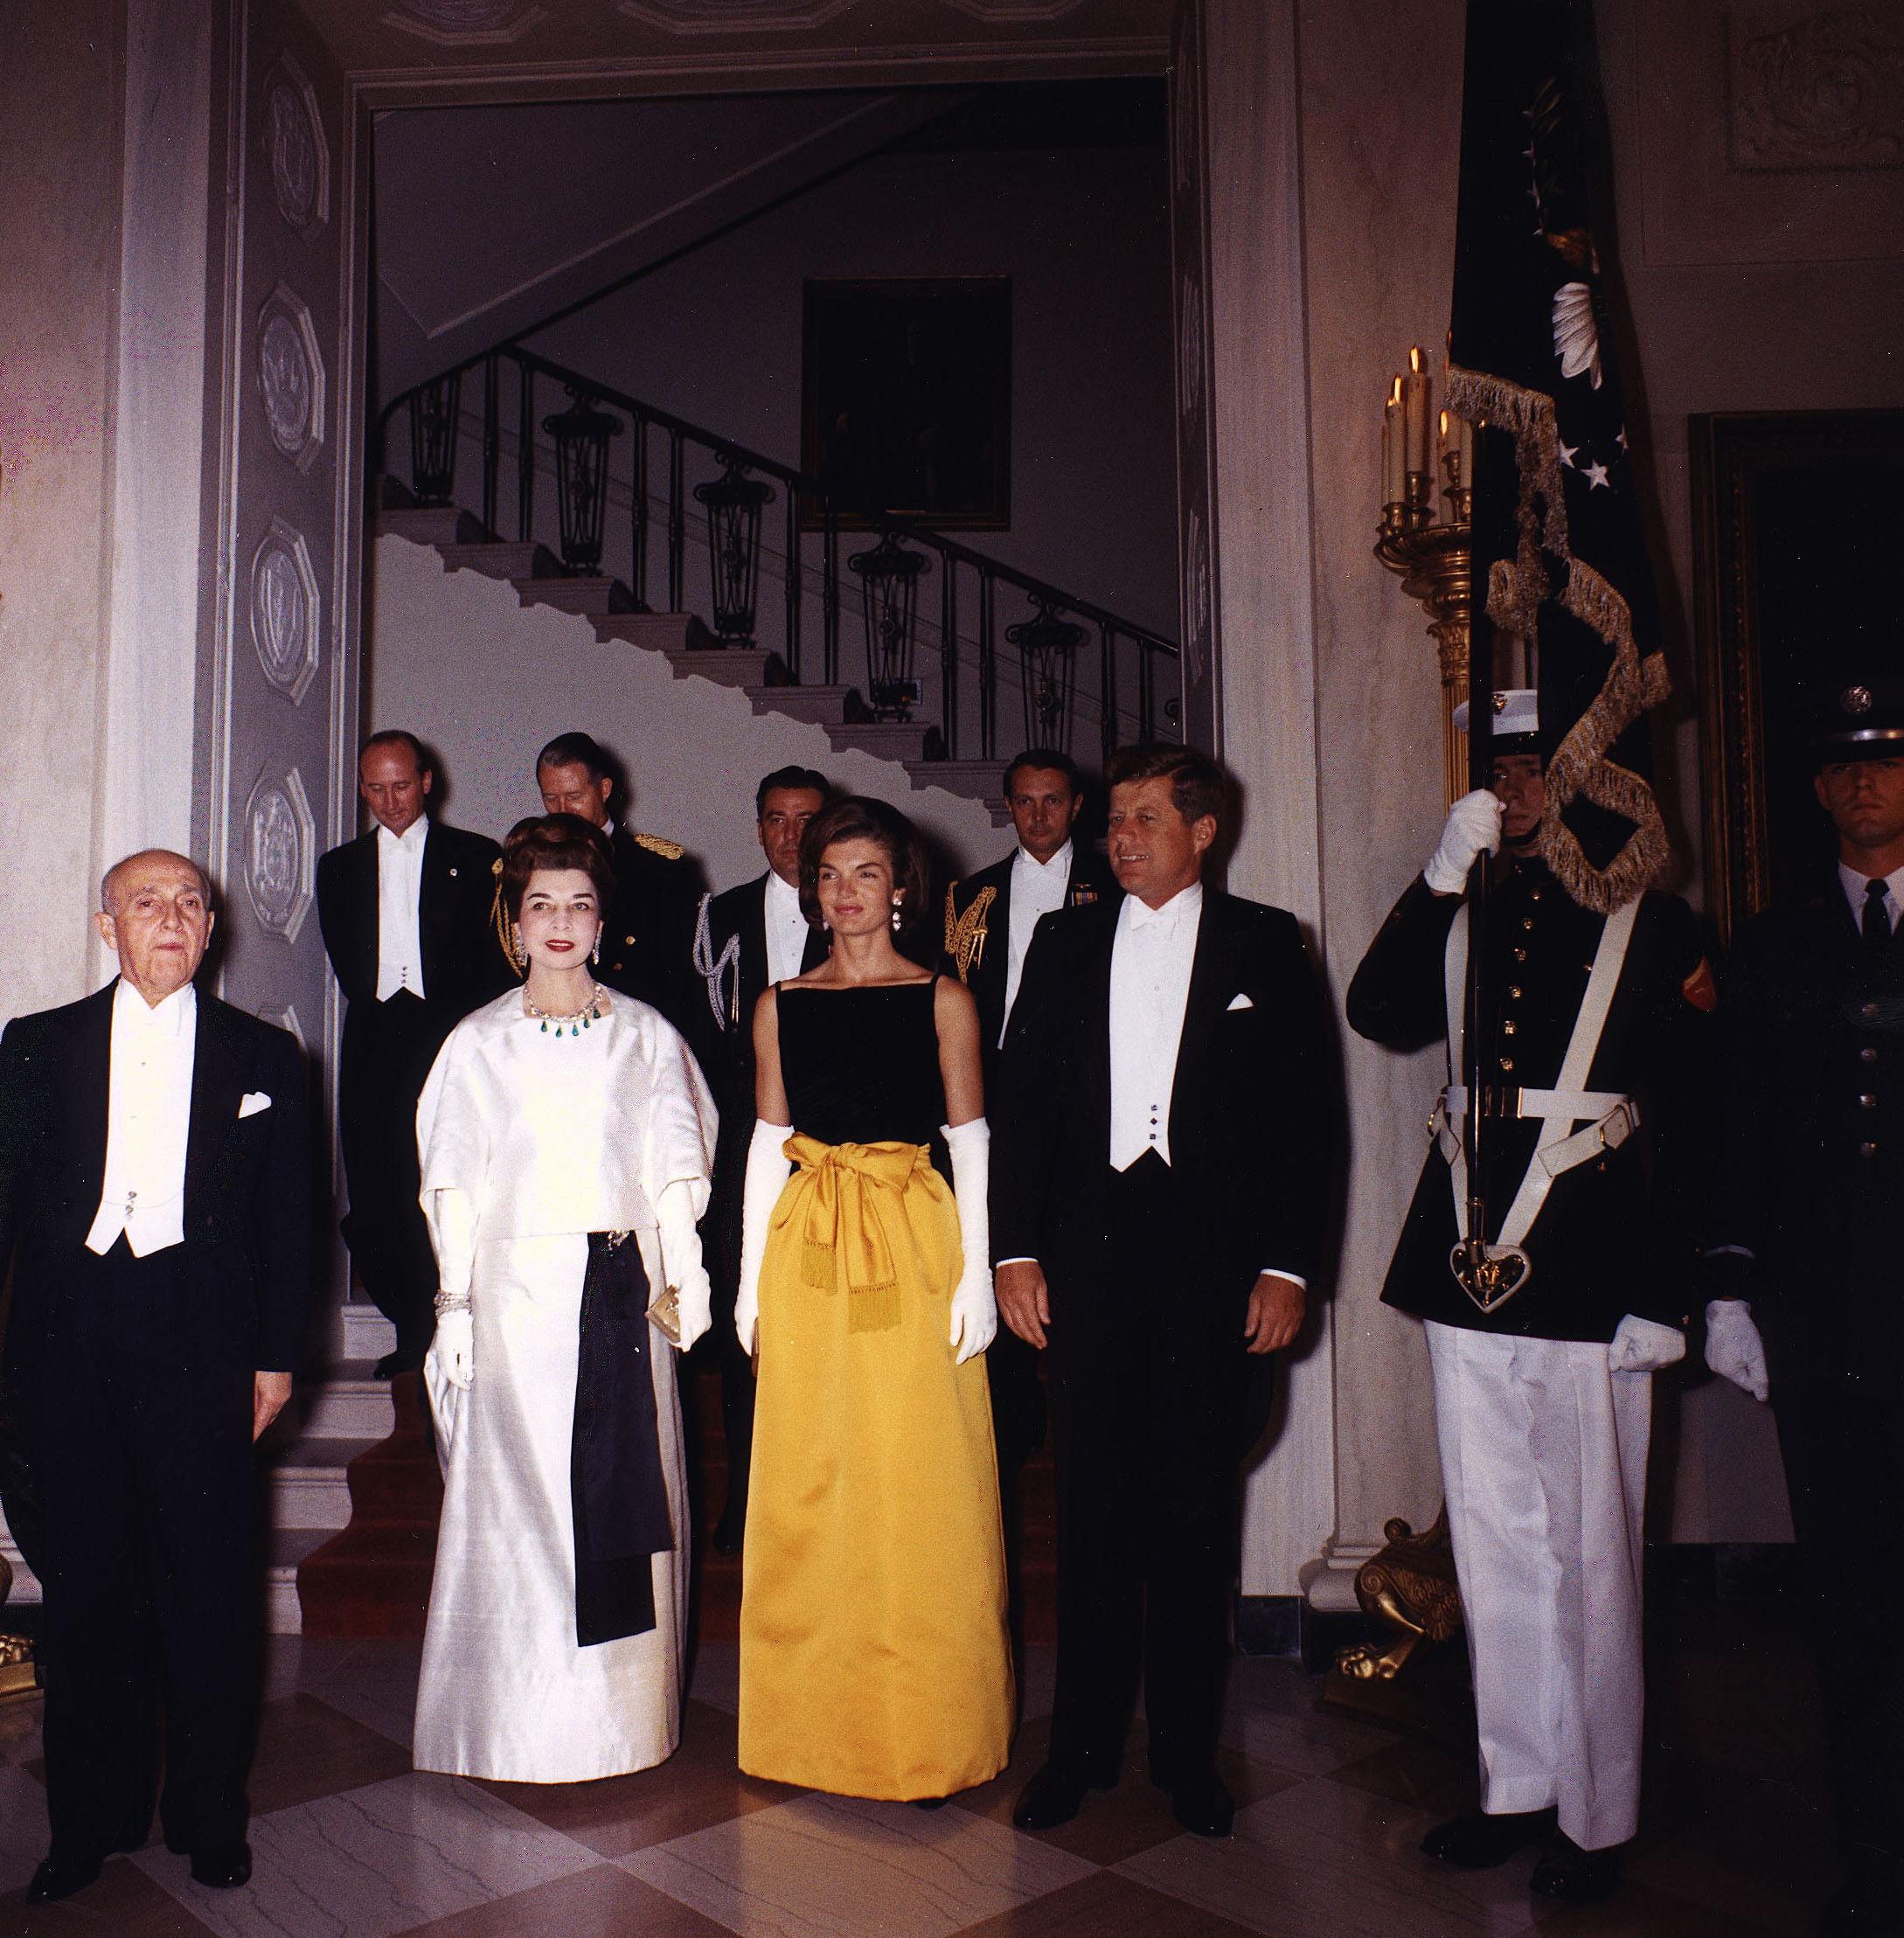 President John F. Kennedy and Jacqueline Kennedy, right, pose for a photograph with guests before a dinner in honor of the President of Peru, left, at the White House September 19, 1961 in Washington, DC